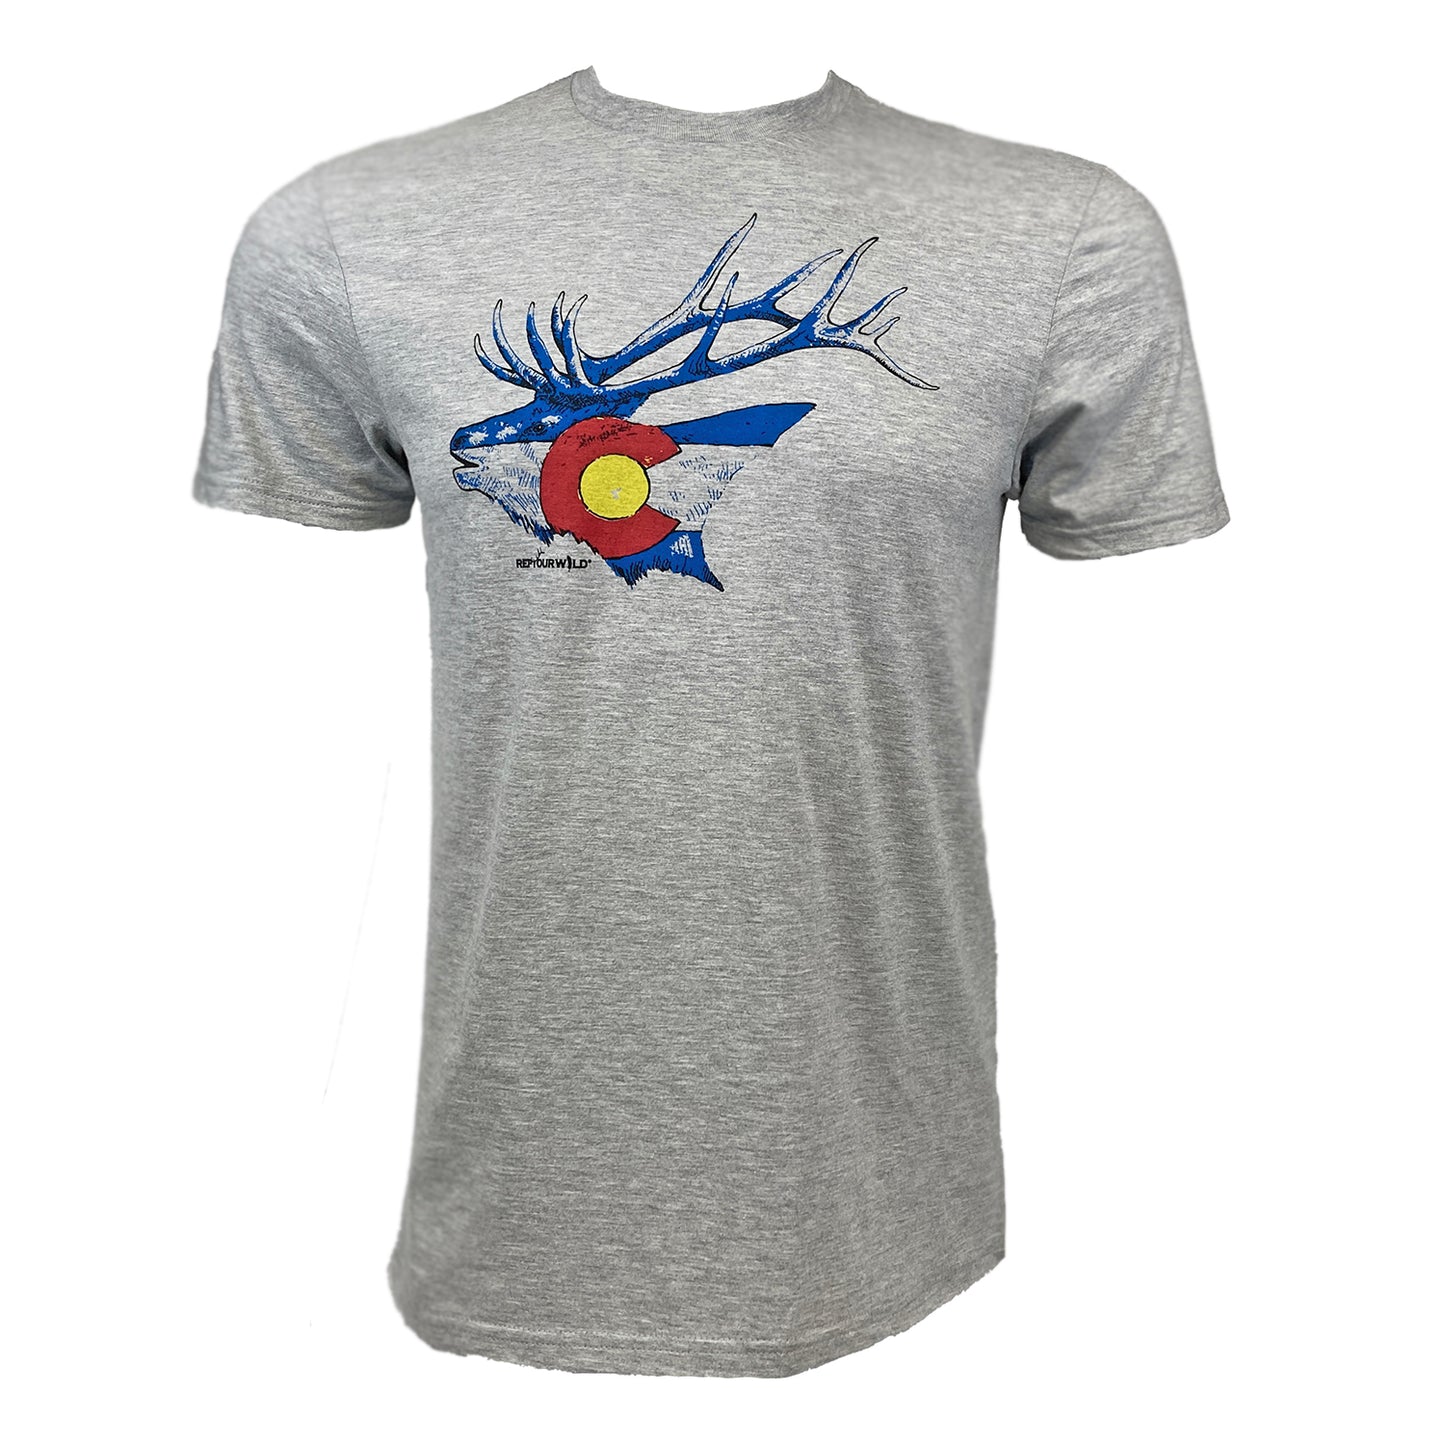 Gray tee shown from the front with bugling elk head filled with Colorado flag on the chest.